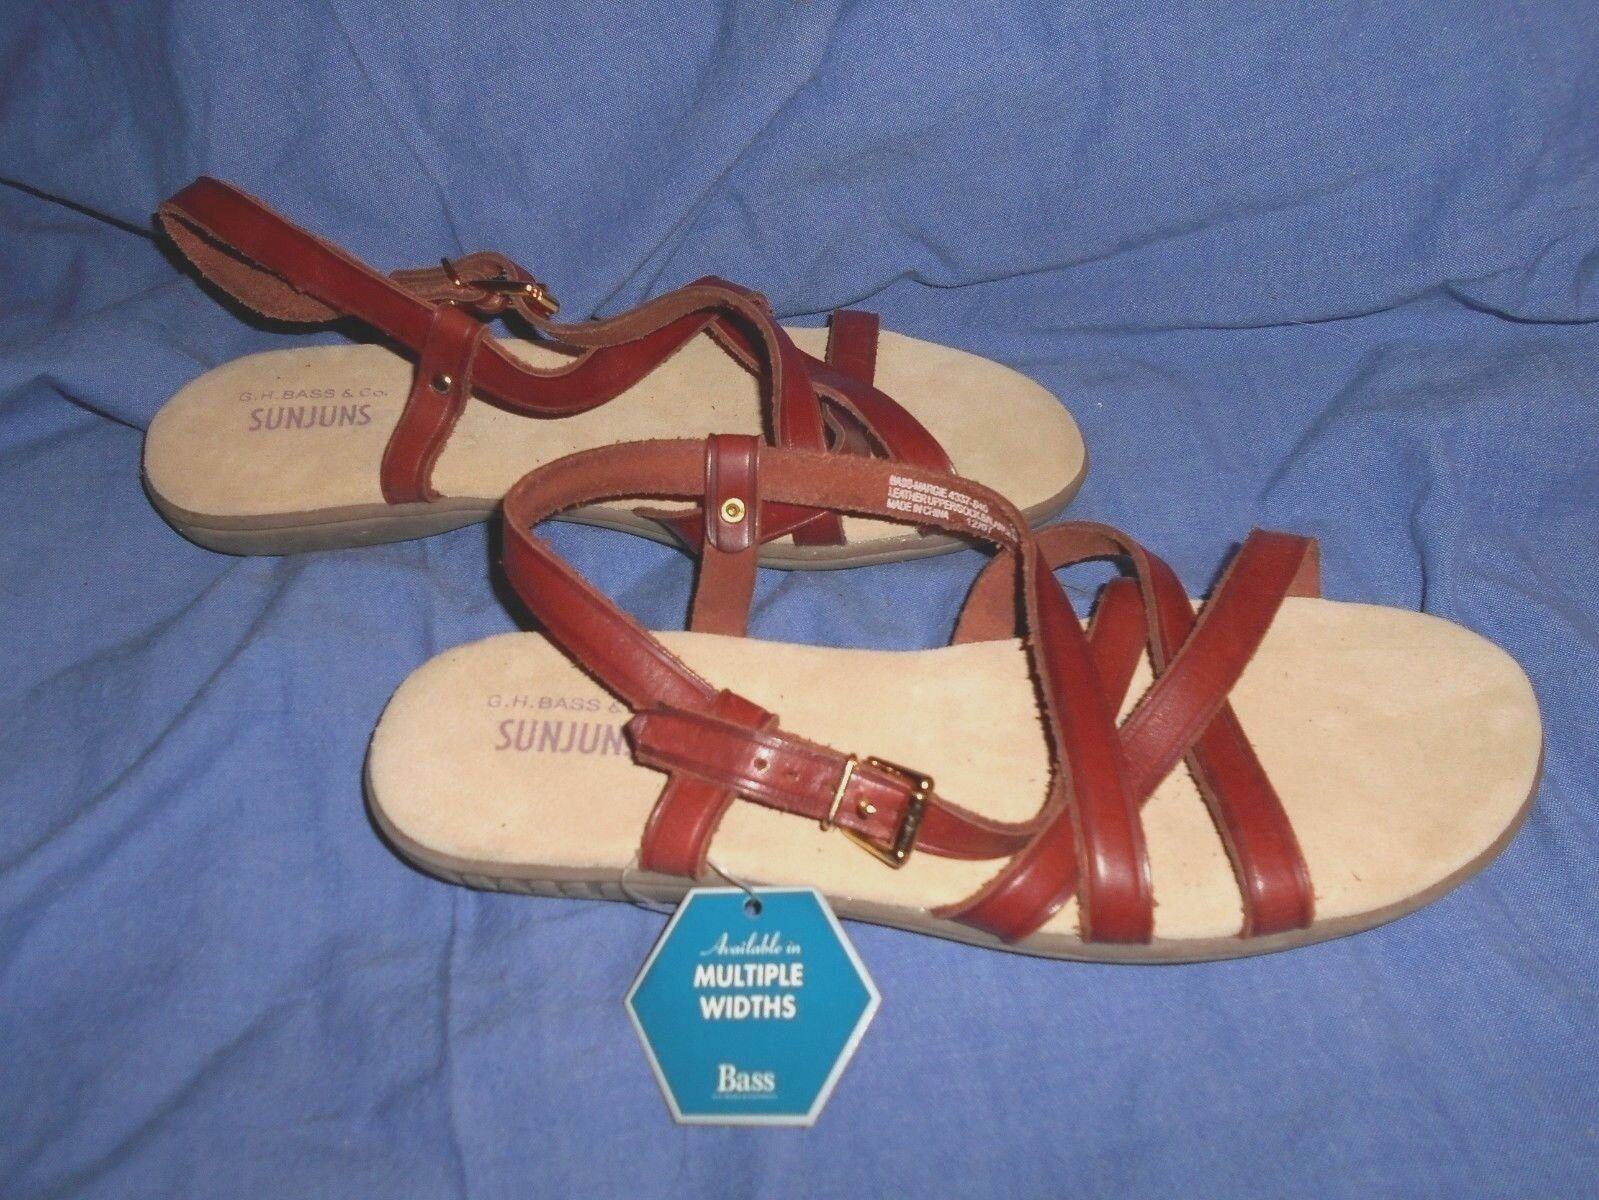 bass sandals from the 90s